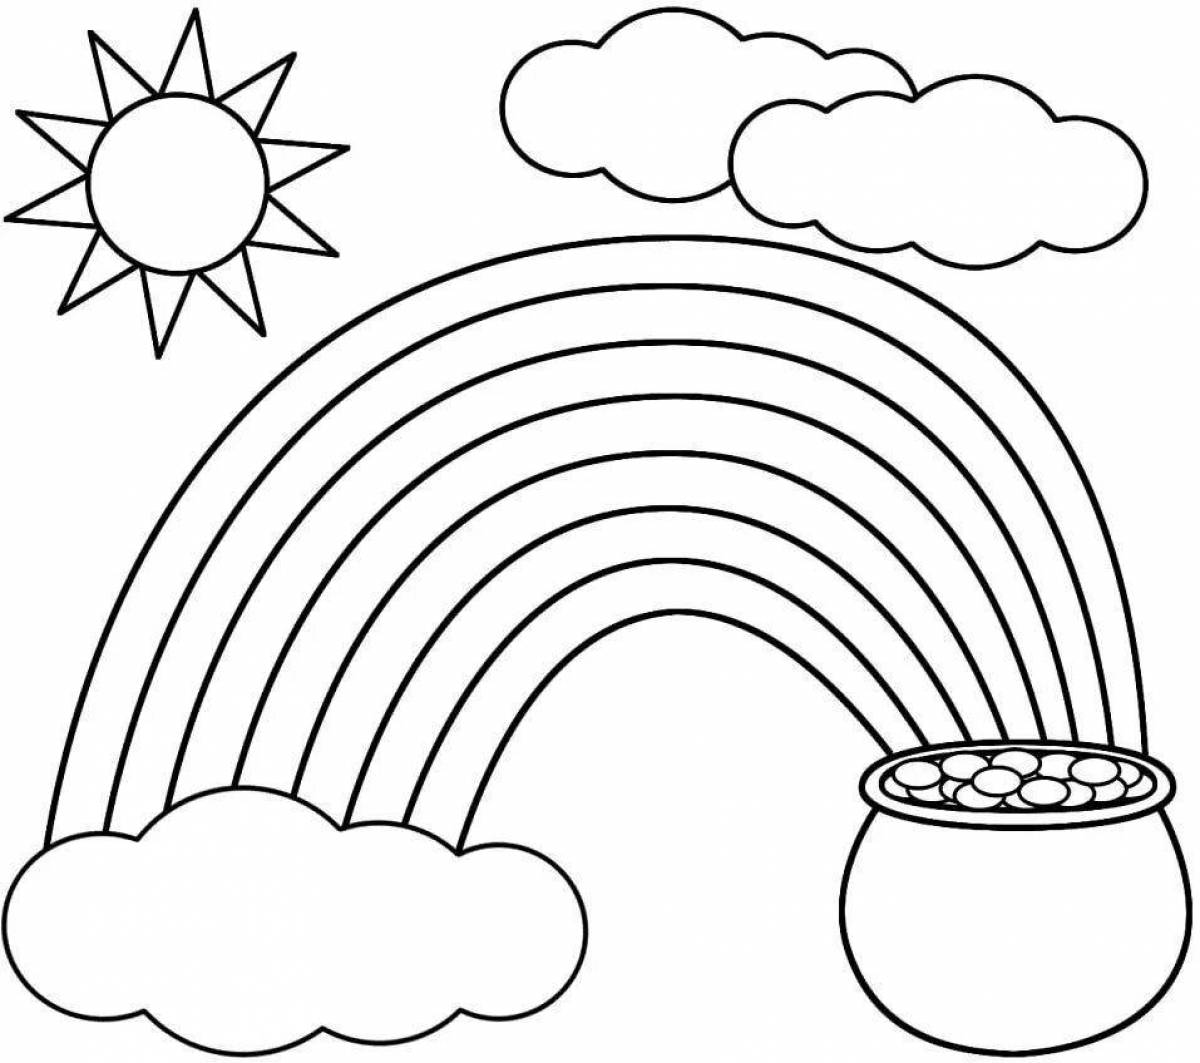 Color-fiesta rainbow friends coloring page